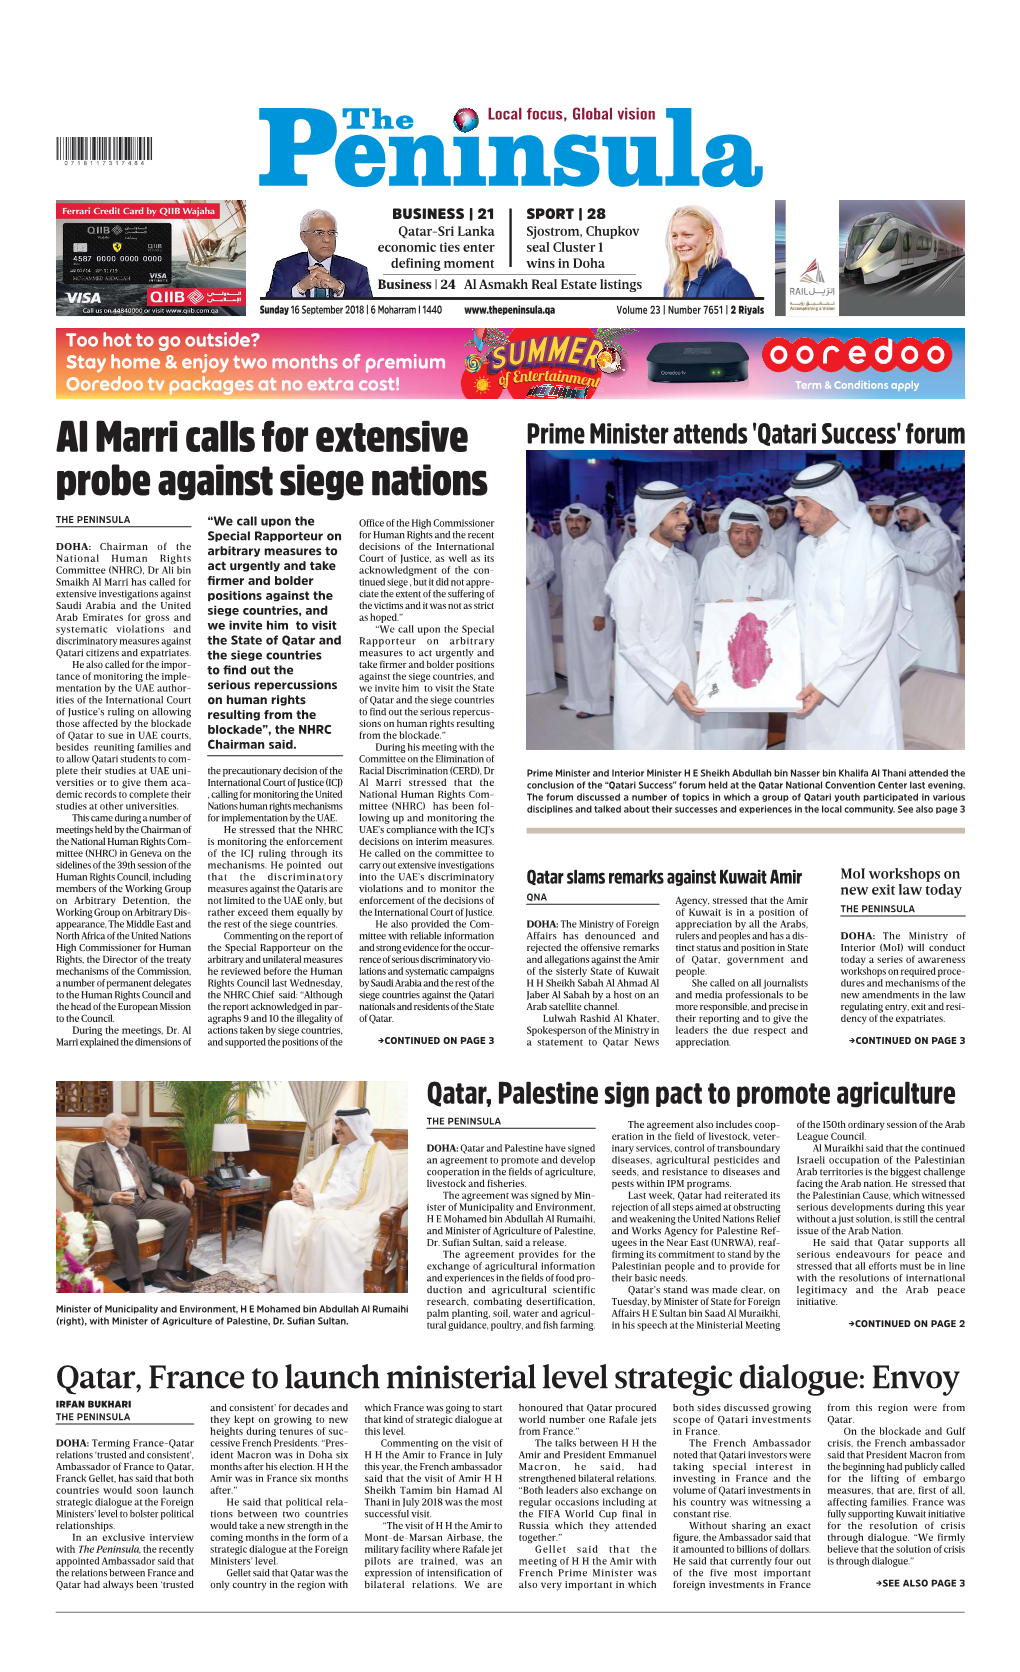 Al Marri Calls for Extensive Probe Against Siege Nations Residency, Exit Today CONTINUED from PAGE 1 Courts of the Siege Countries